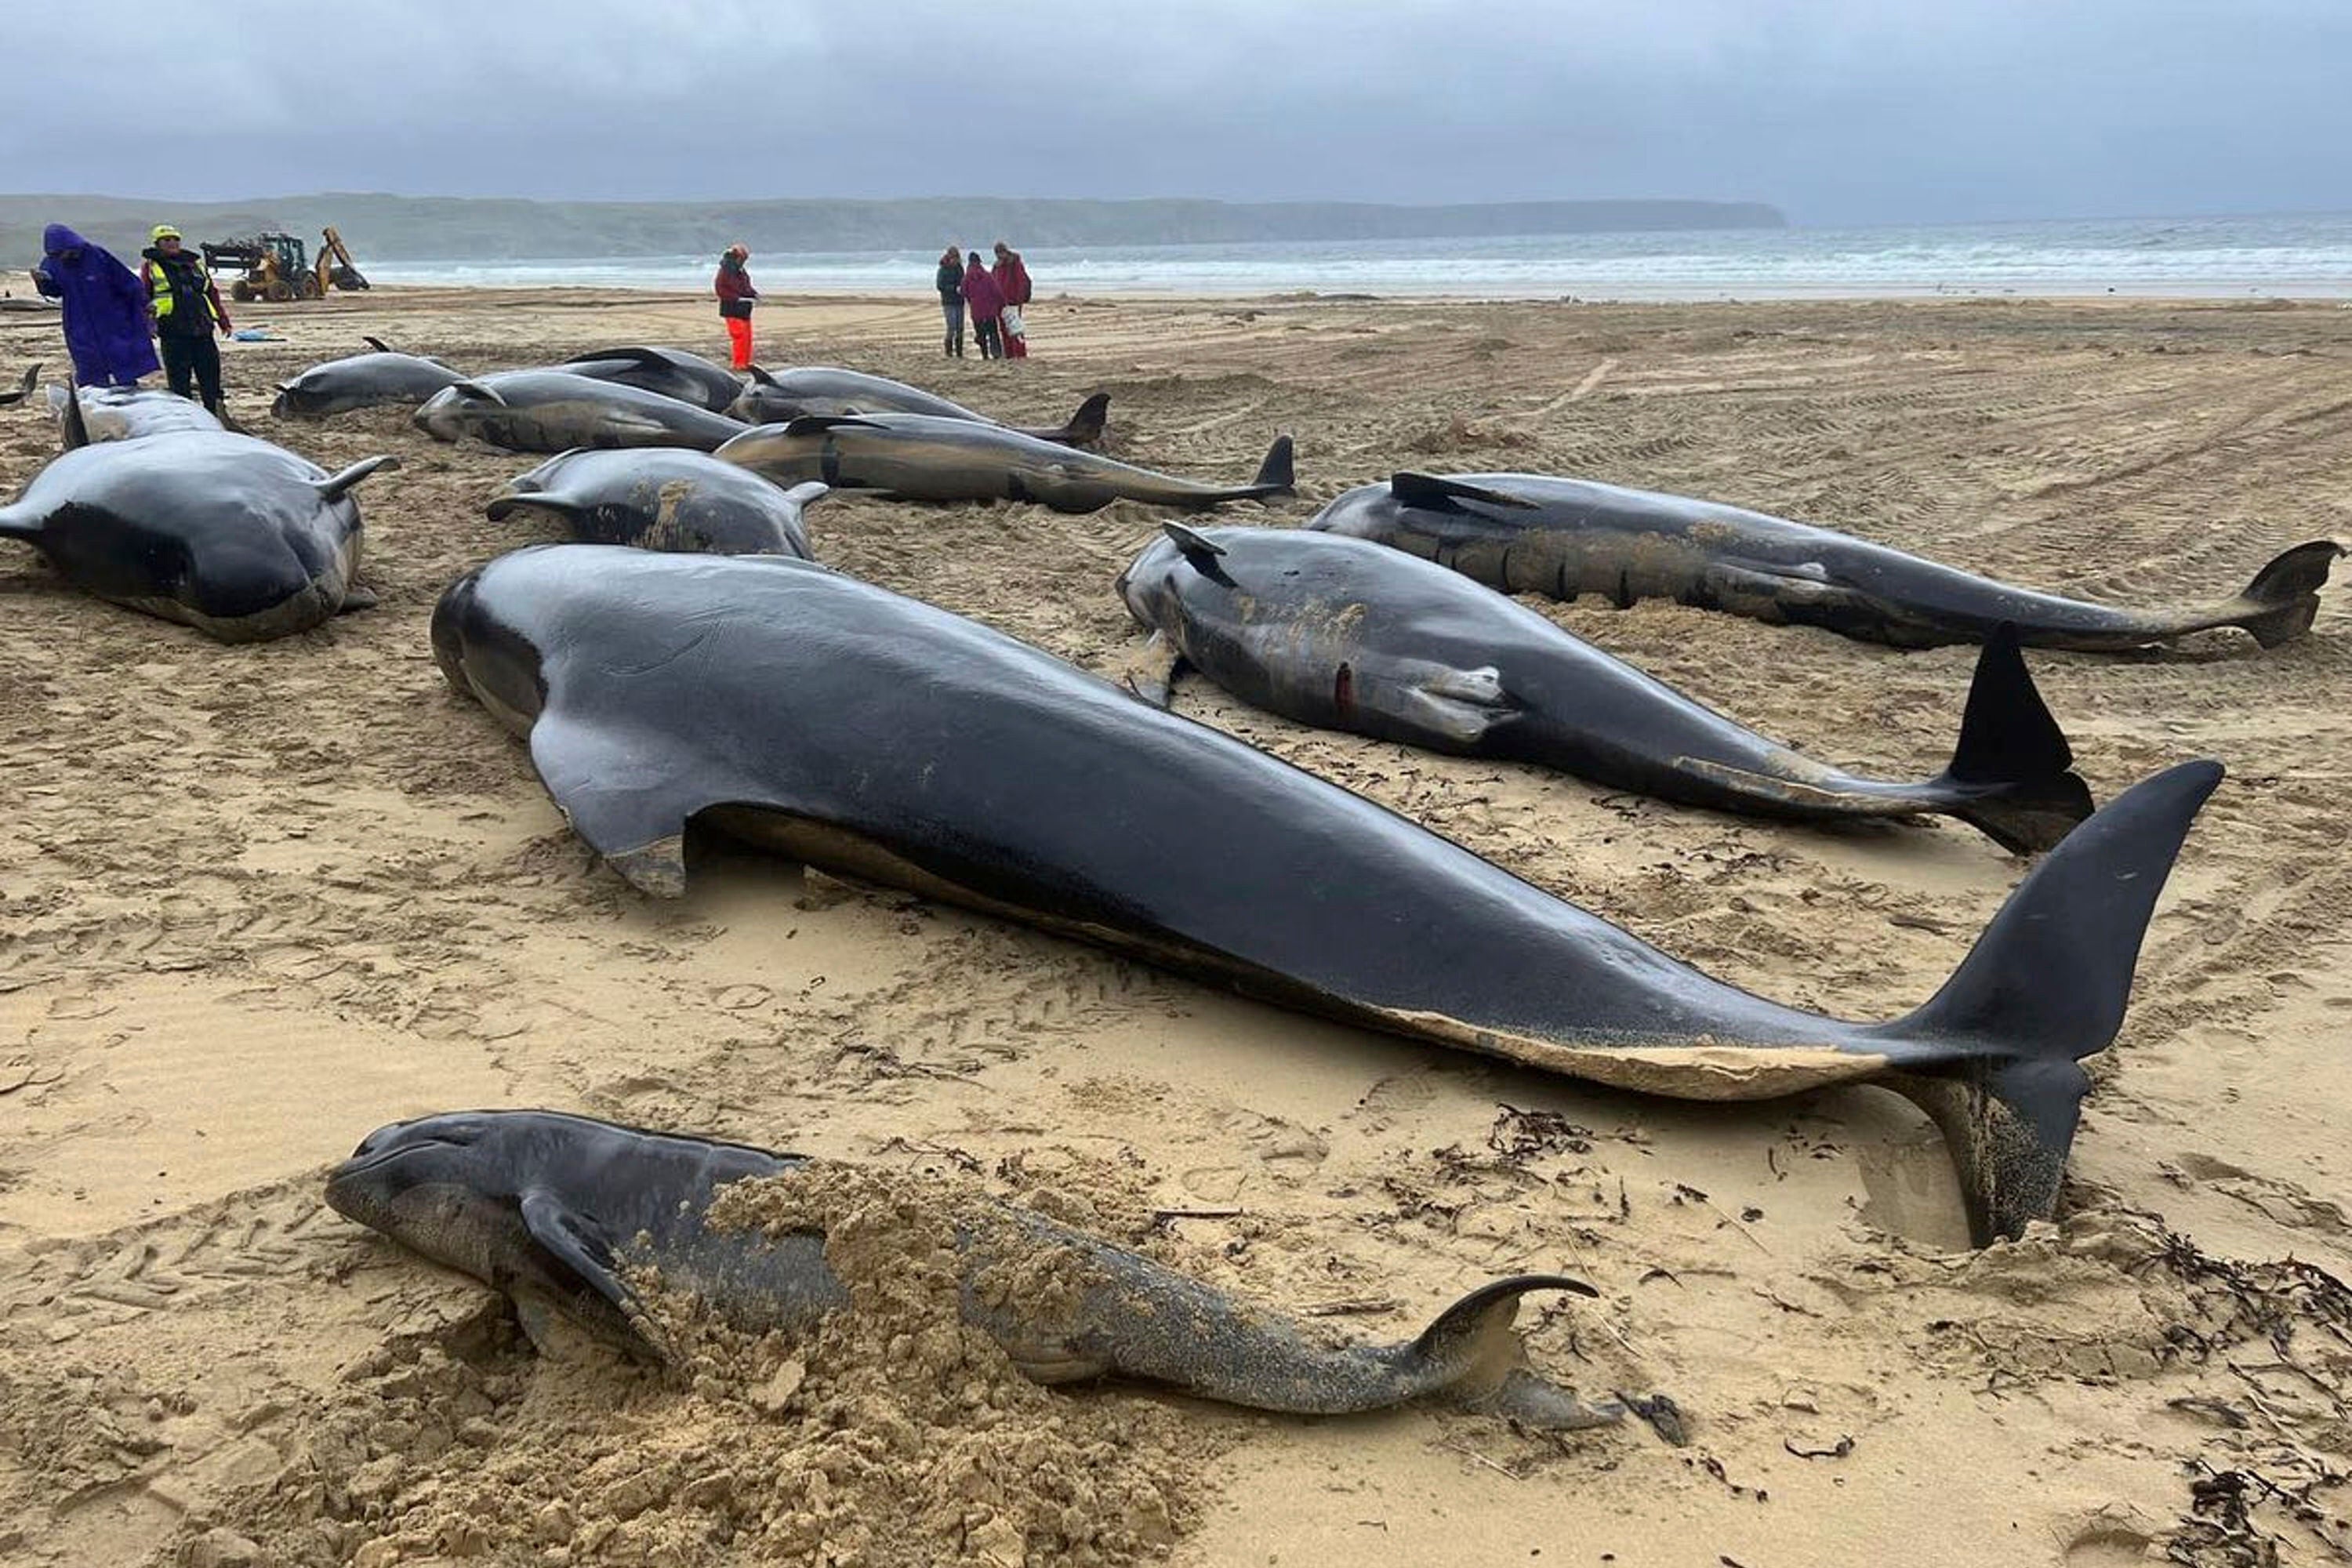 On 16 July last year, 55 pilot whales were stranded on the Isle of Lewis, Outer Hebrides, with only one surviving